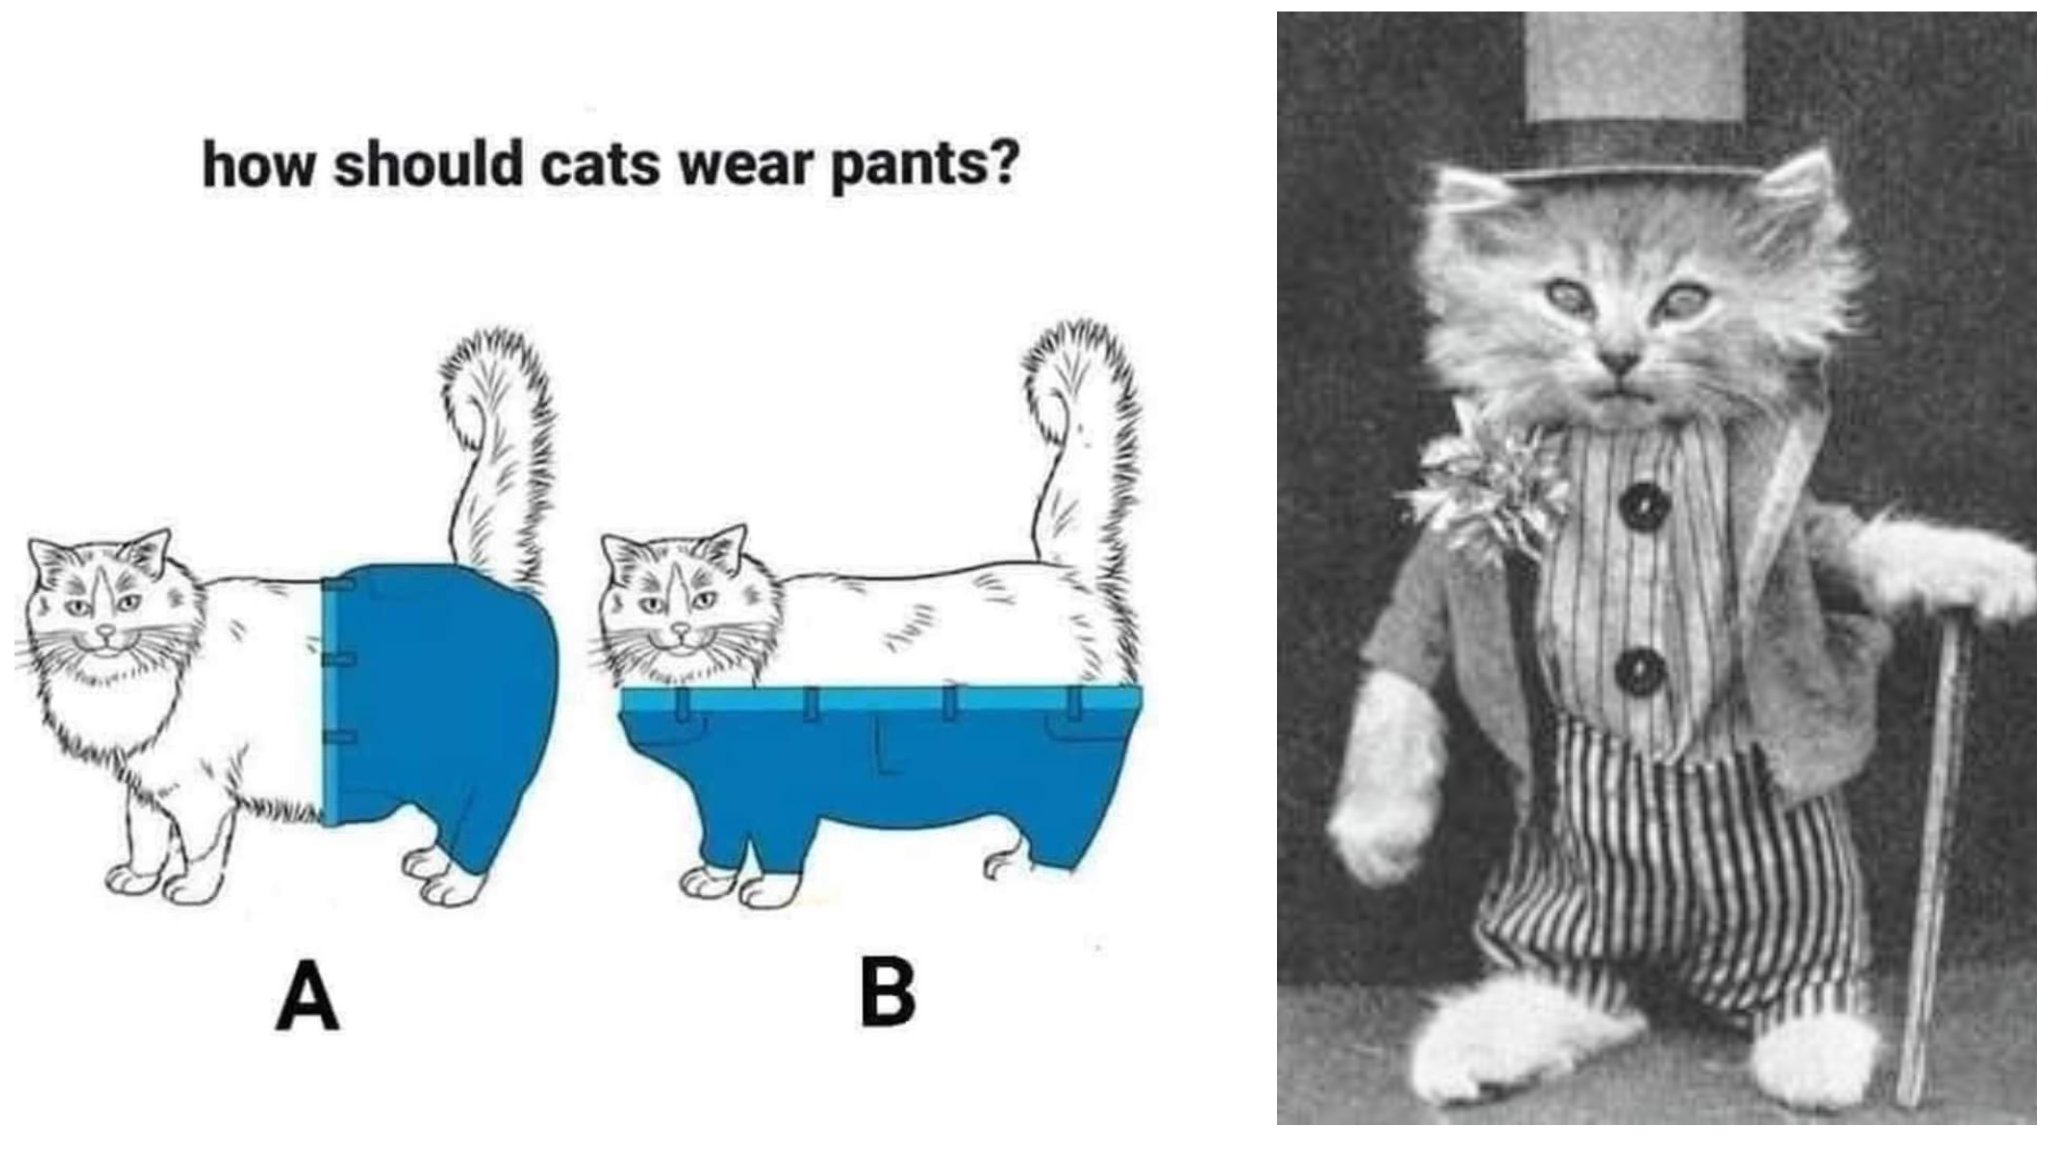 Diane Wallace on X: How should cats wear pants? I think this